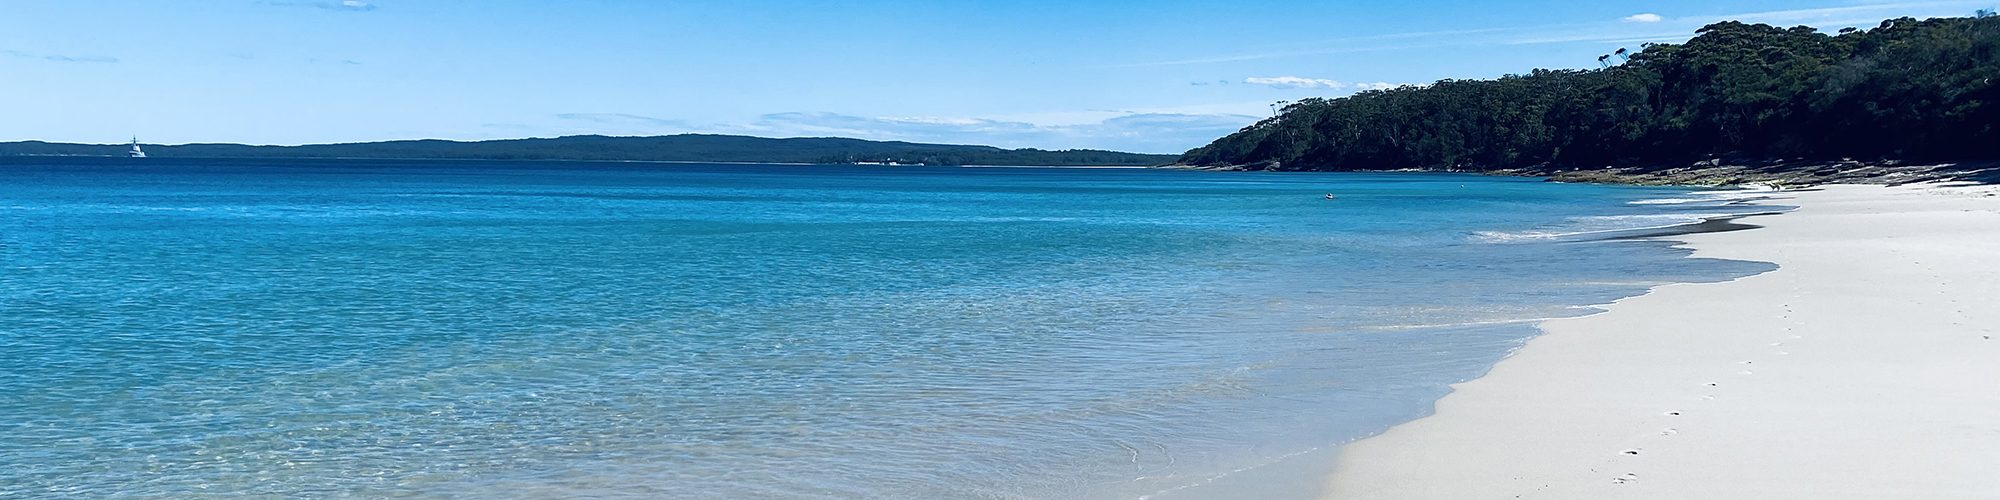 Nautilus Apartments Jervis Bay: beach in Jervis Bay shore